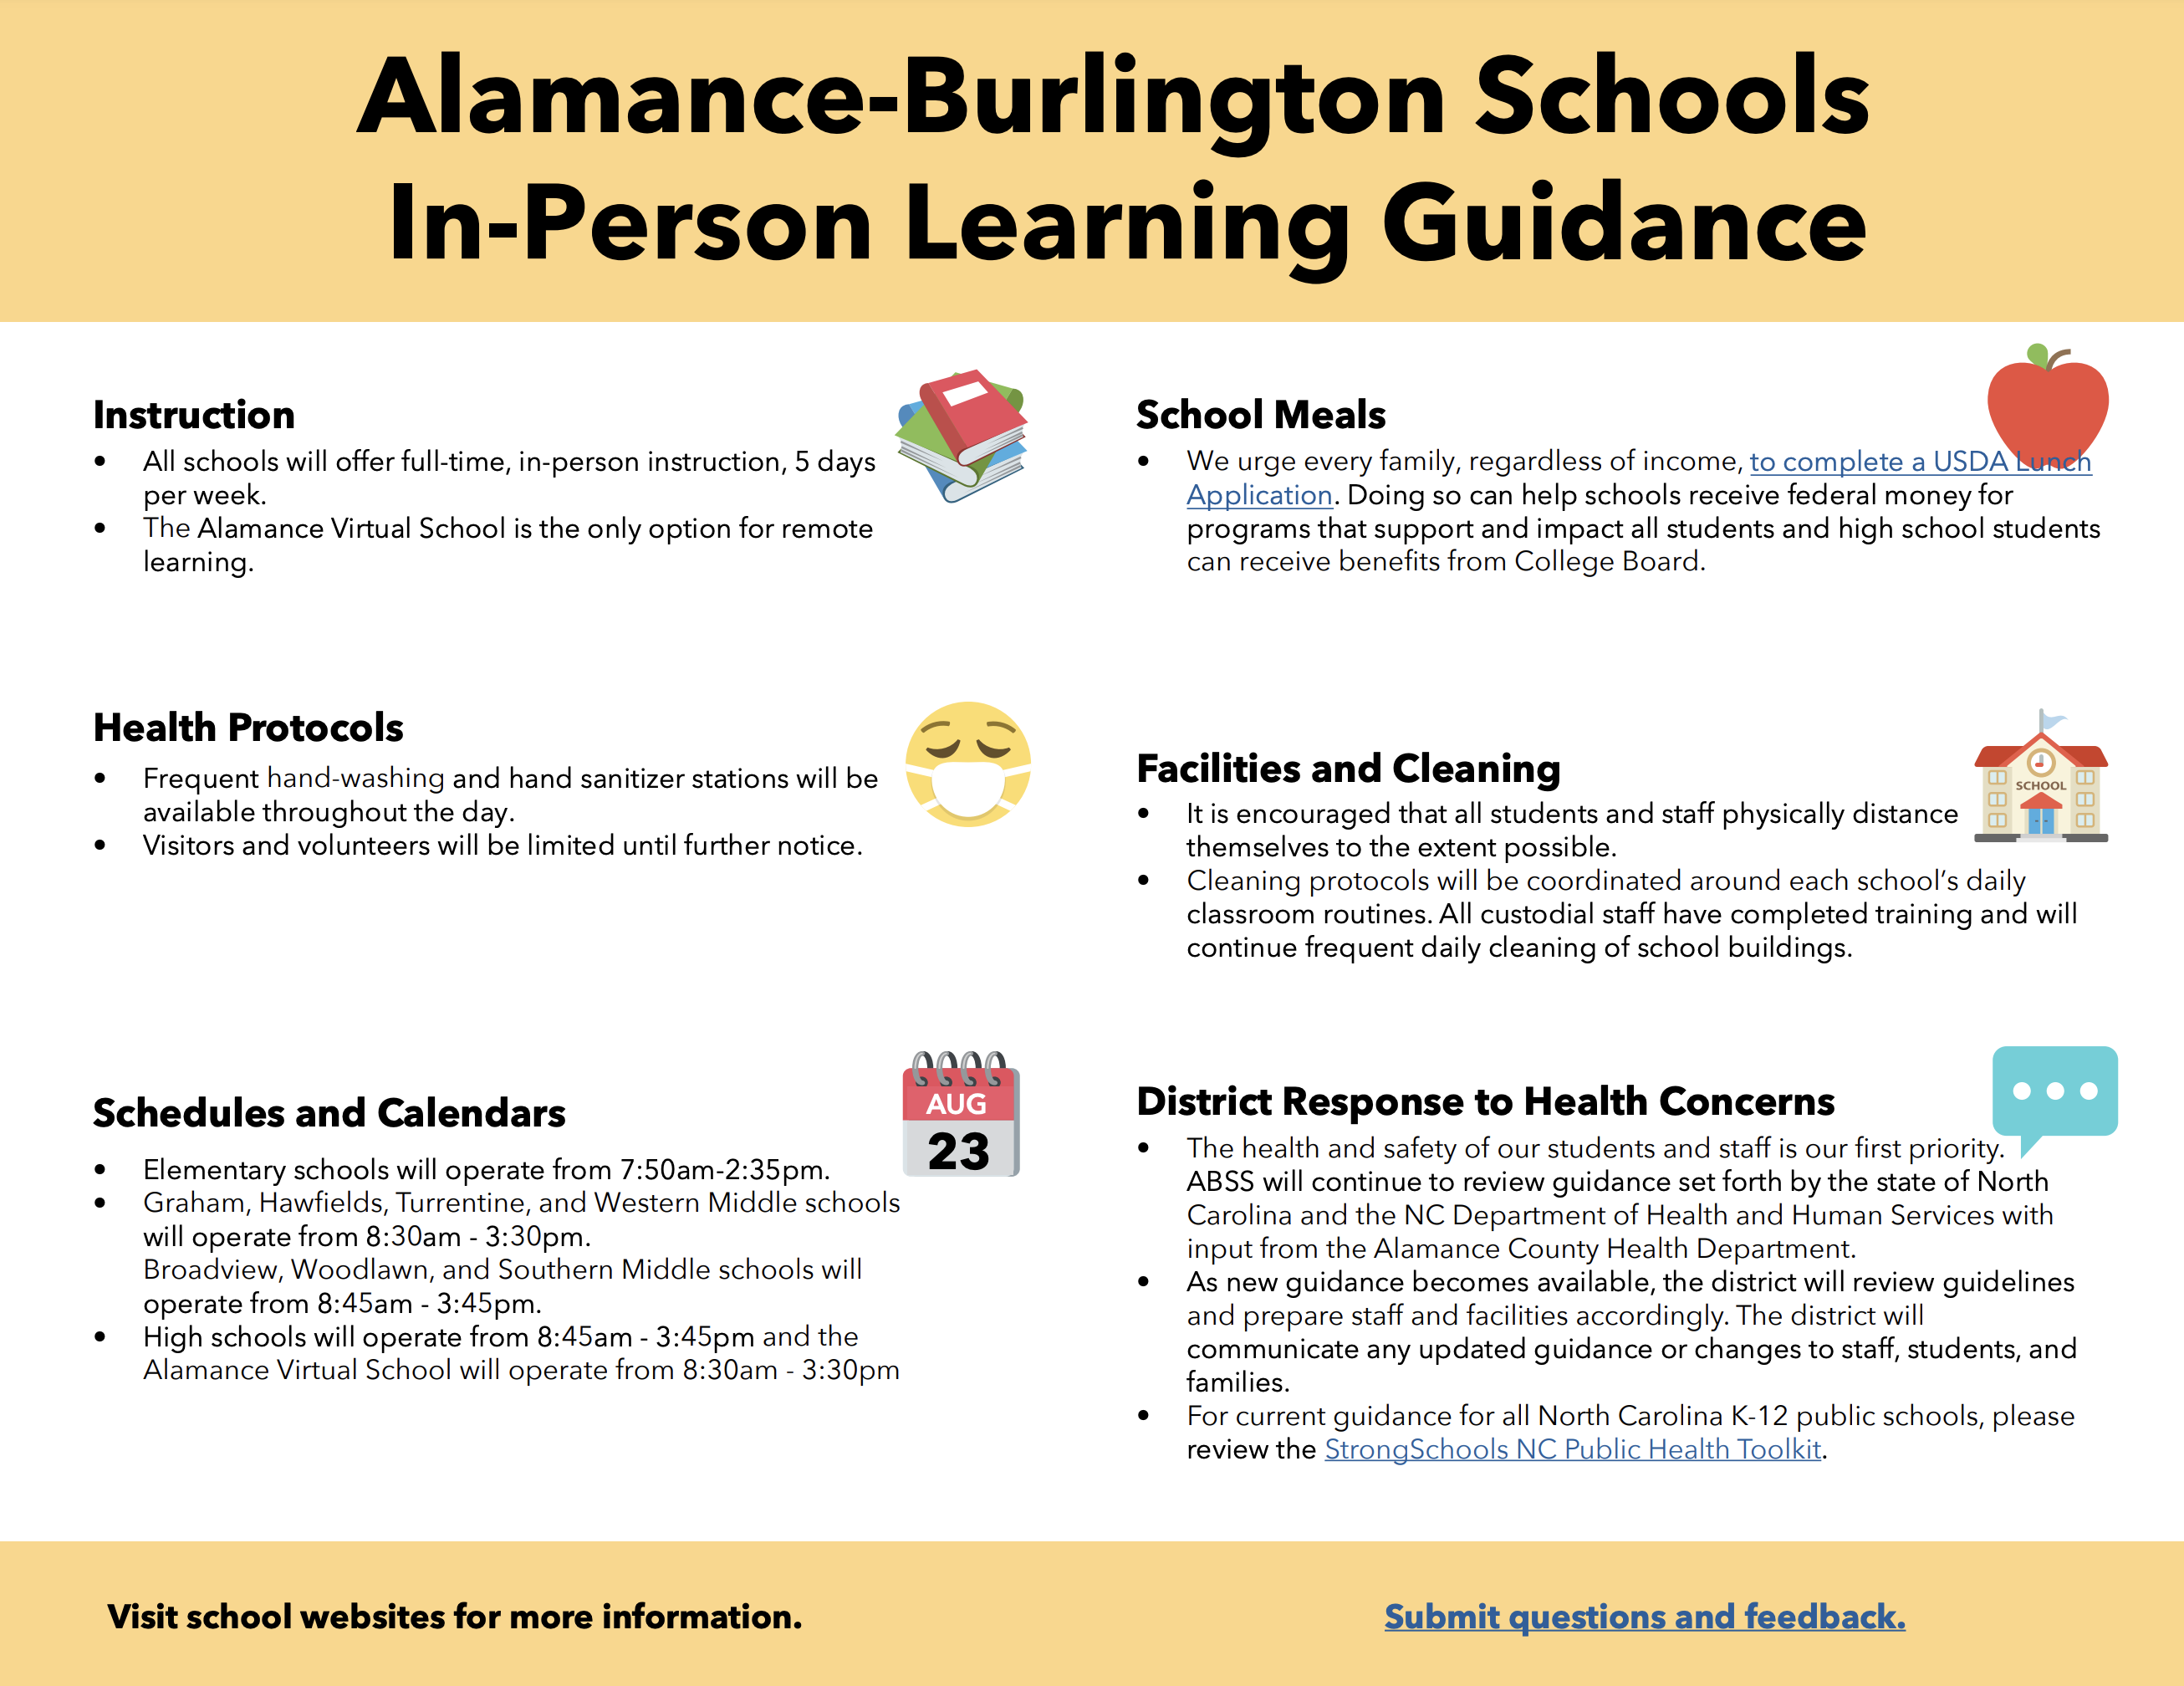 Infographic with text Alamance-Burlington Schools In-Person Learning Guidance 💬 Instruction 😷 • All schools will offer full-time, in-person instruction, 5 days per week. • The Alamance Virtual School is the only option for remote learning. 📚 🏫 🍎 Health Protocols • Frequent hand-washing and hand sanitizer stations will be available throughout the day. • Visitors and volunteers will be limited until further notice. Schedules and Calendars • Elementary schools will operate from 7:50am-2:35pm. • Graham, Hawfields, Turrentine, and Western Middle schools will operate from 8:30am - 3:30pm. Broadview, Woodlawn, and Southern Middle schools will operate from 8:45am - 3:45pm. • High schools will operate from 8:45am - 3:45pm and the Alamance Virtual School will operate from 8:30am - 3:30pm School Meals • We urge every family, regardless of income, to complete a USDA Lunch Application. Doing so can help schools receive federal money for programs that support and impact all students and high school students can receive benefits from College Board. Facilities and Cleaning • It is encouraged that all students and staff physically distance themselves to the extent possible. • Cleaning protocols will be coordinated around each school’s daily classroom routines. All custodial staff have completed training and will continue frequent daily cleaning of school buildings. District Response to Health Concerns • The health and safety of our students and staff is our first priority. ABSS will continue to review guidance set forth by the state of North Carolina and the NC Department of Health and Human Services with input from the Alamance County Health Department. • As new guidance becomes available, the district will review guidelines and prepare staff and facilities accordingly. The district will communicate any updated guidance or changes to staff, students, and families. • For current guidance for all North Carolina K-12 public schools, please review the StrongSchools NC Public Health Toolkit. Visit school websites for more information. 🗓AUG 23 Submit questions and feedback.